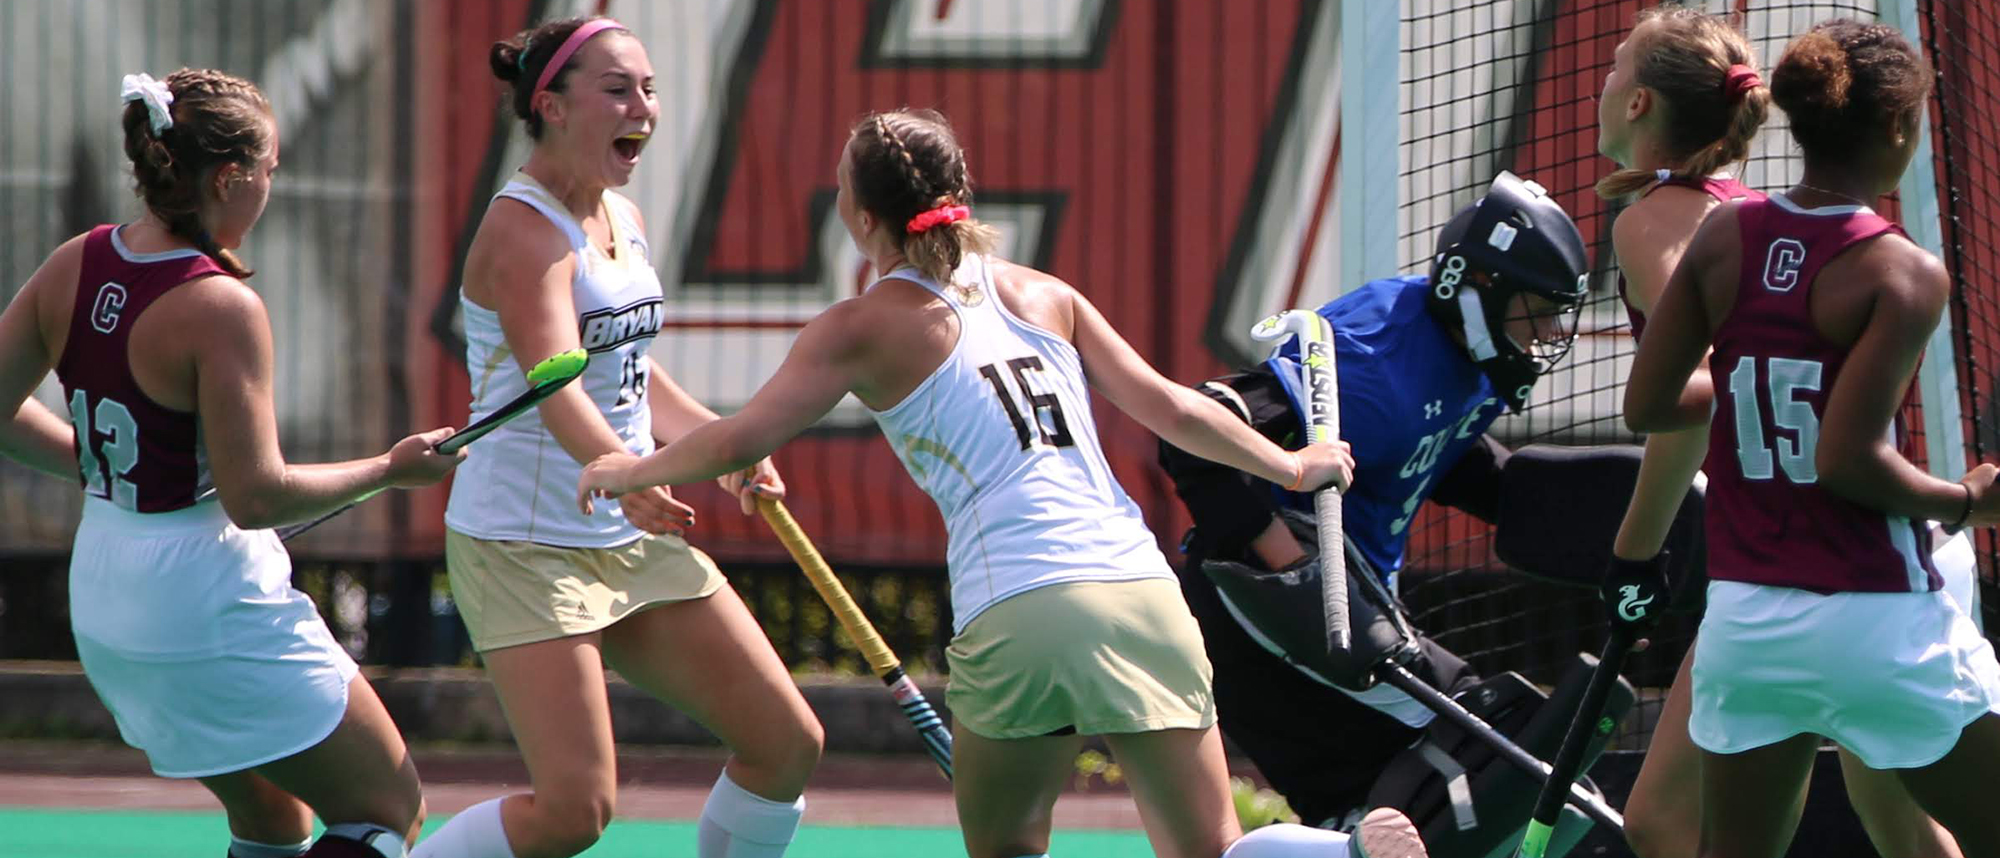 Bryant blanks LIU in first conference win of the season